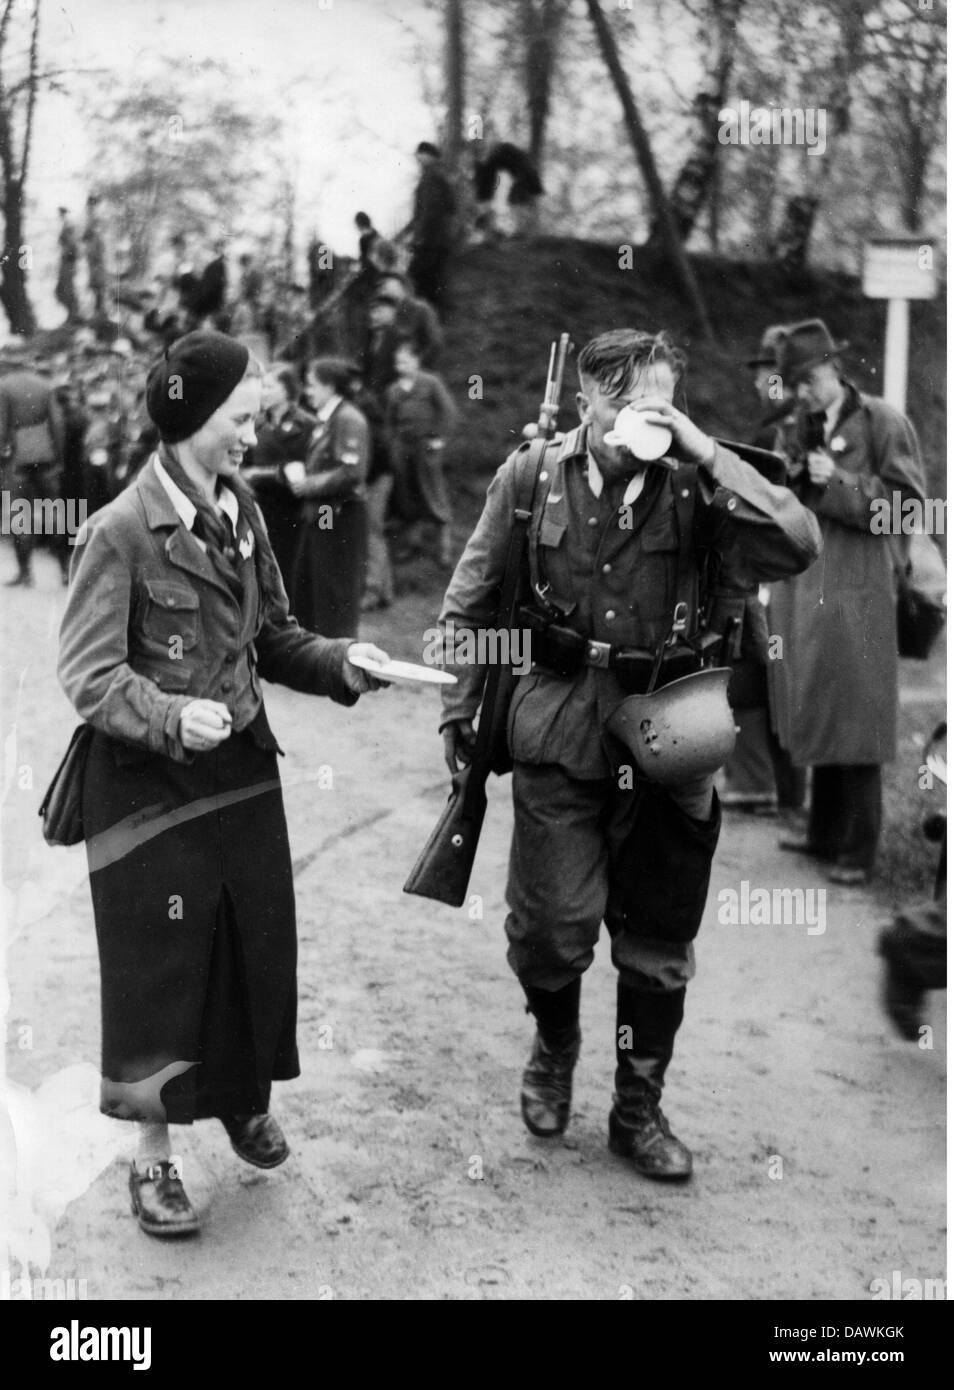 Nazism / National Socialism, military, Wehrmacht, army, League of German Maidens girl handing a thirsty soldier something to drink, during a military competition, 1930s, Additional-Rights-Clearences-Not Available Stock Photo